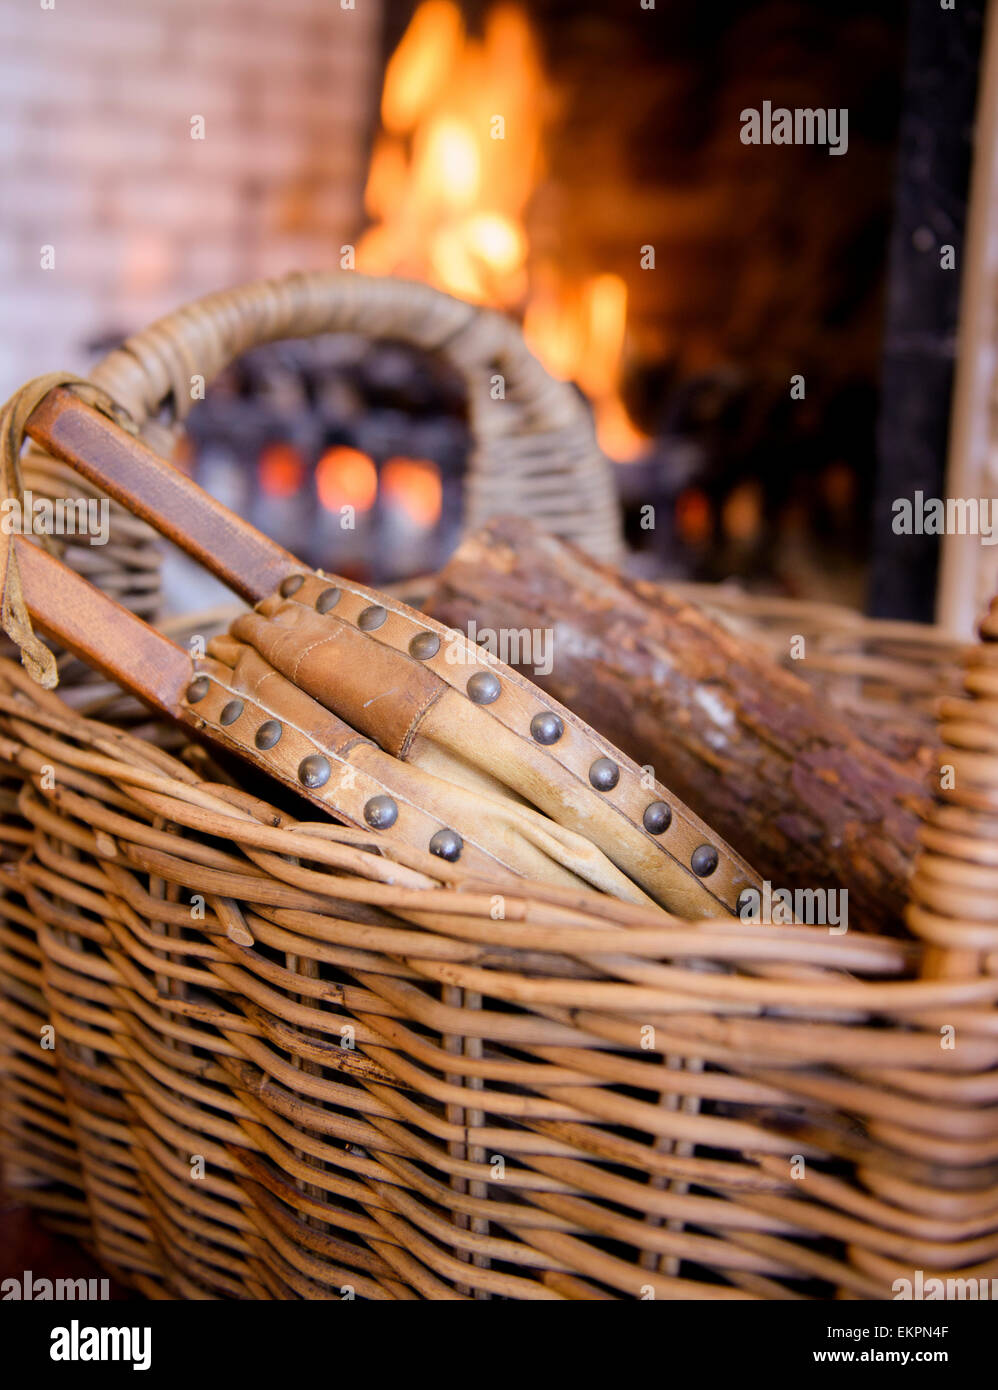 Bellows in a wicker basket in front of an open fire. Stock Photo